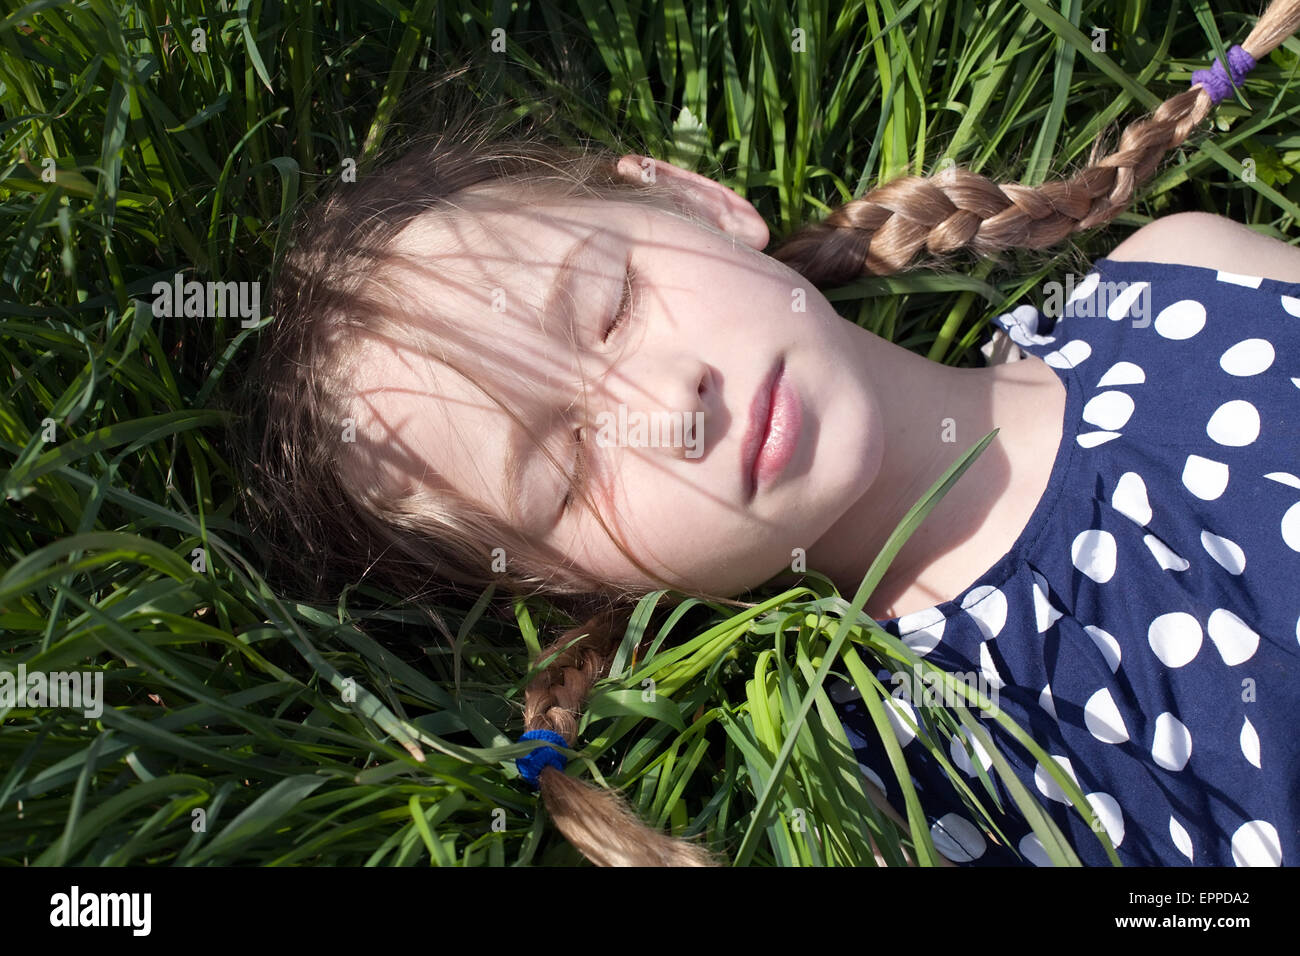 young pretty caucasian girl with two pigtail braids lying and sleeping on green grass Stock Photo